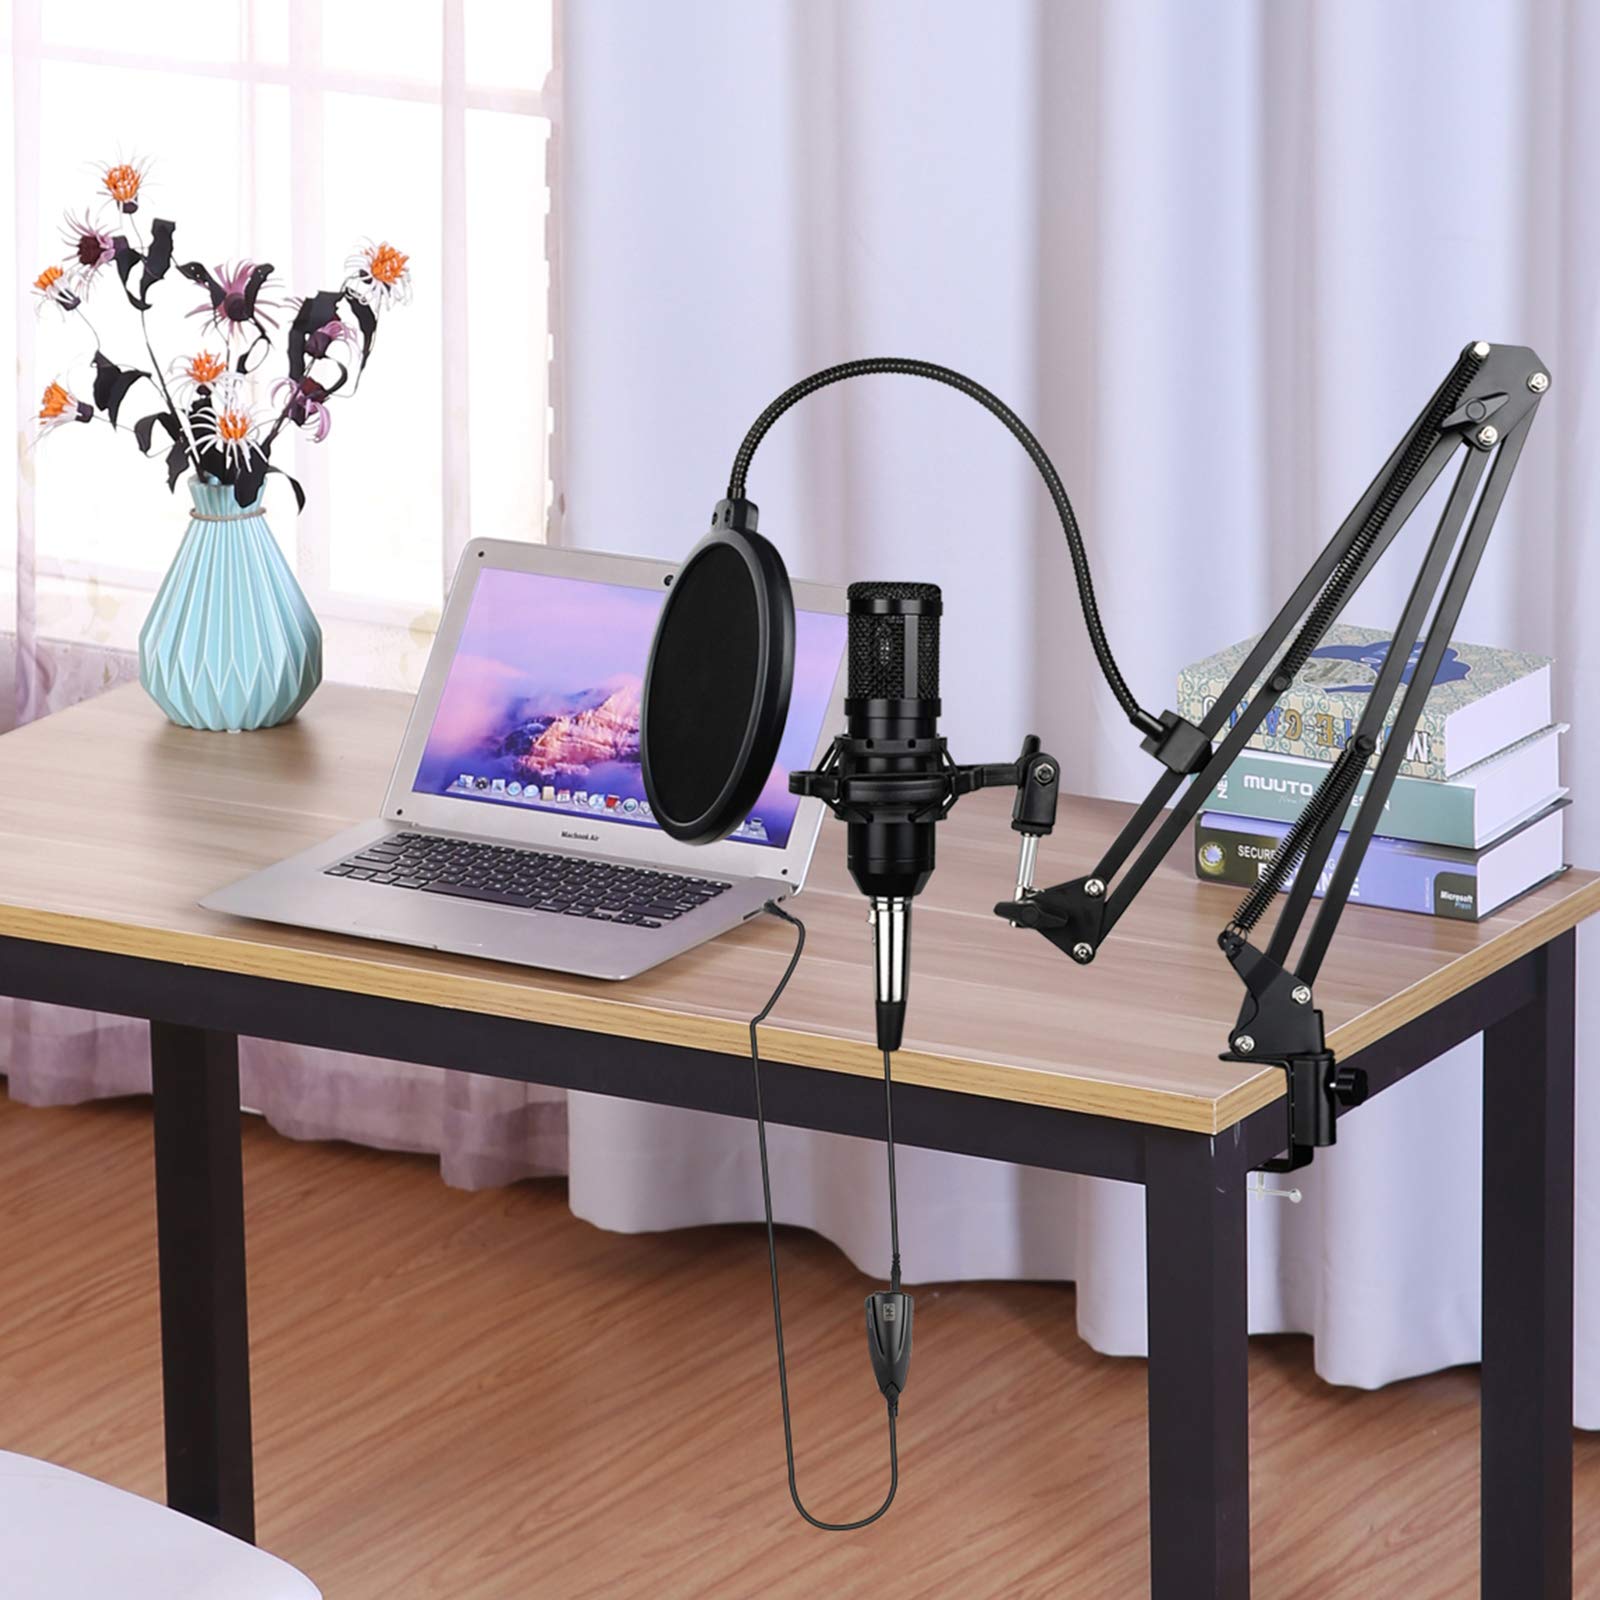 Rybozen USB Microphone, 192KHZ/24Bit Professional PC Computer Podcast Cardioid Condenser Microphone Kit with Sound Chipset Boom Arm for Recording, Karaoke, Gaming, Streaming,Meeting, YouTube